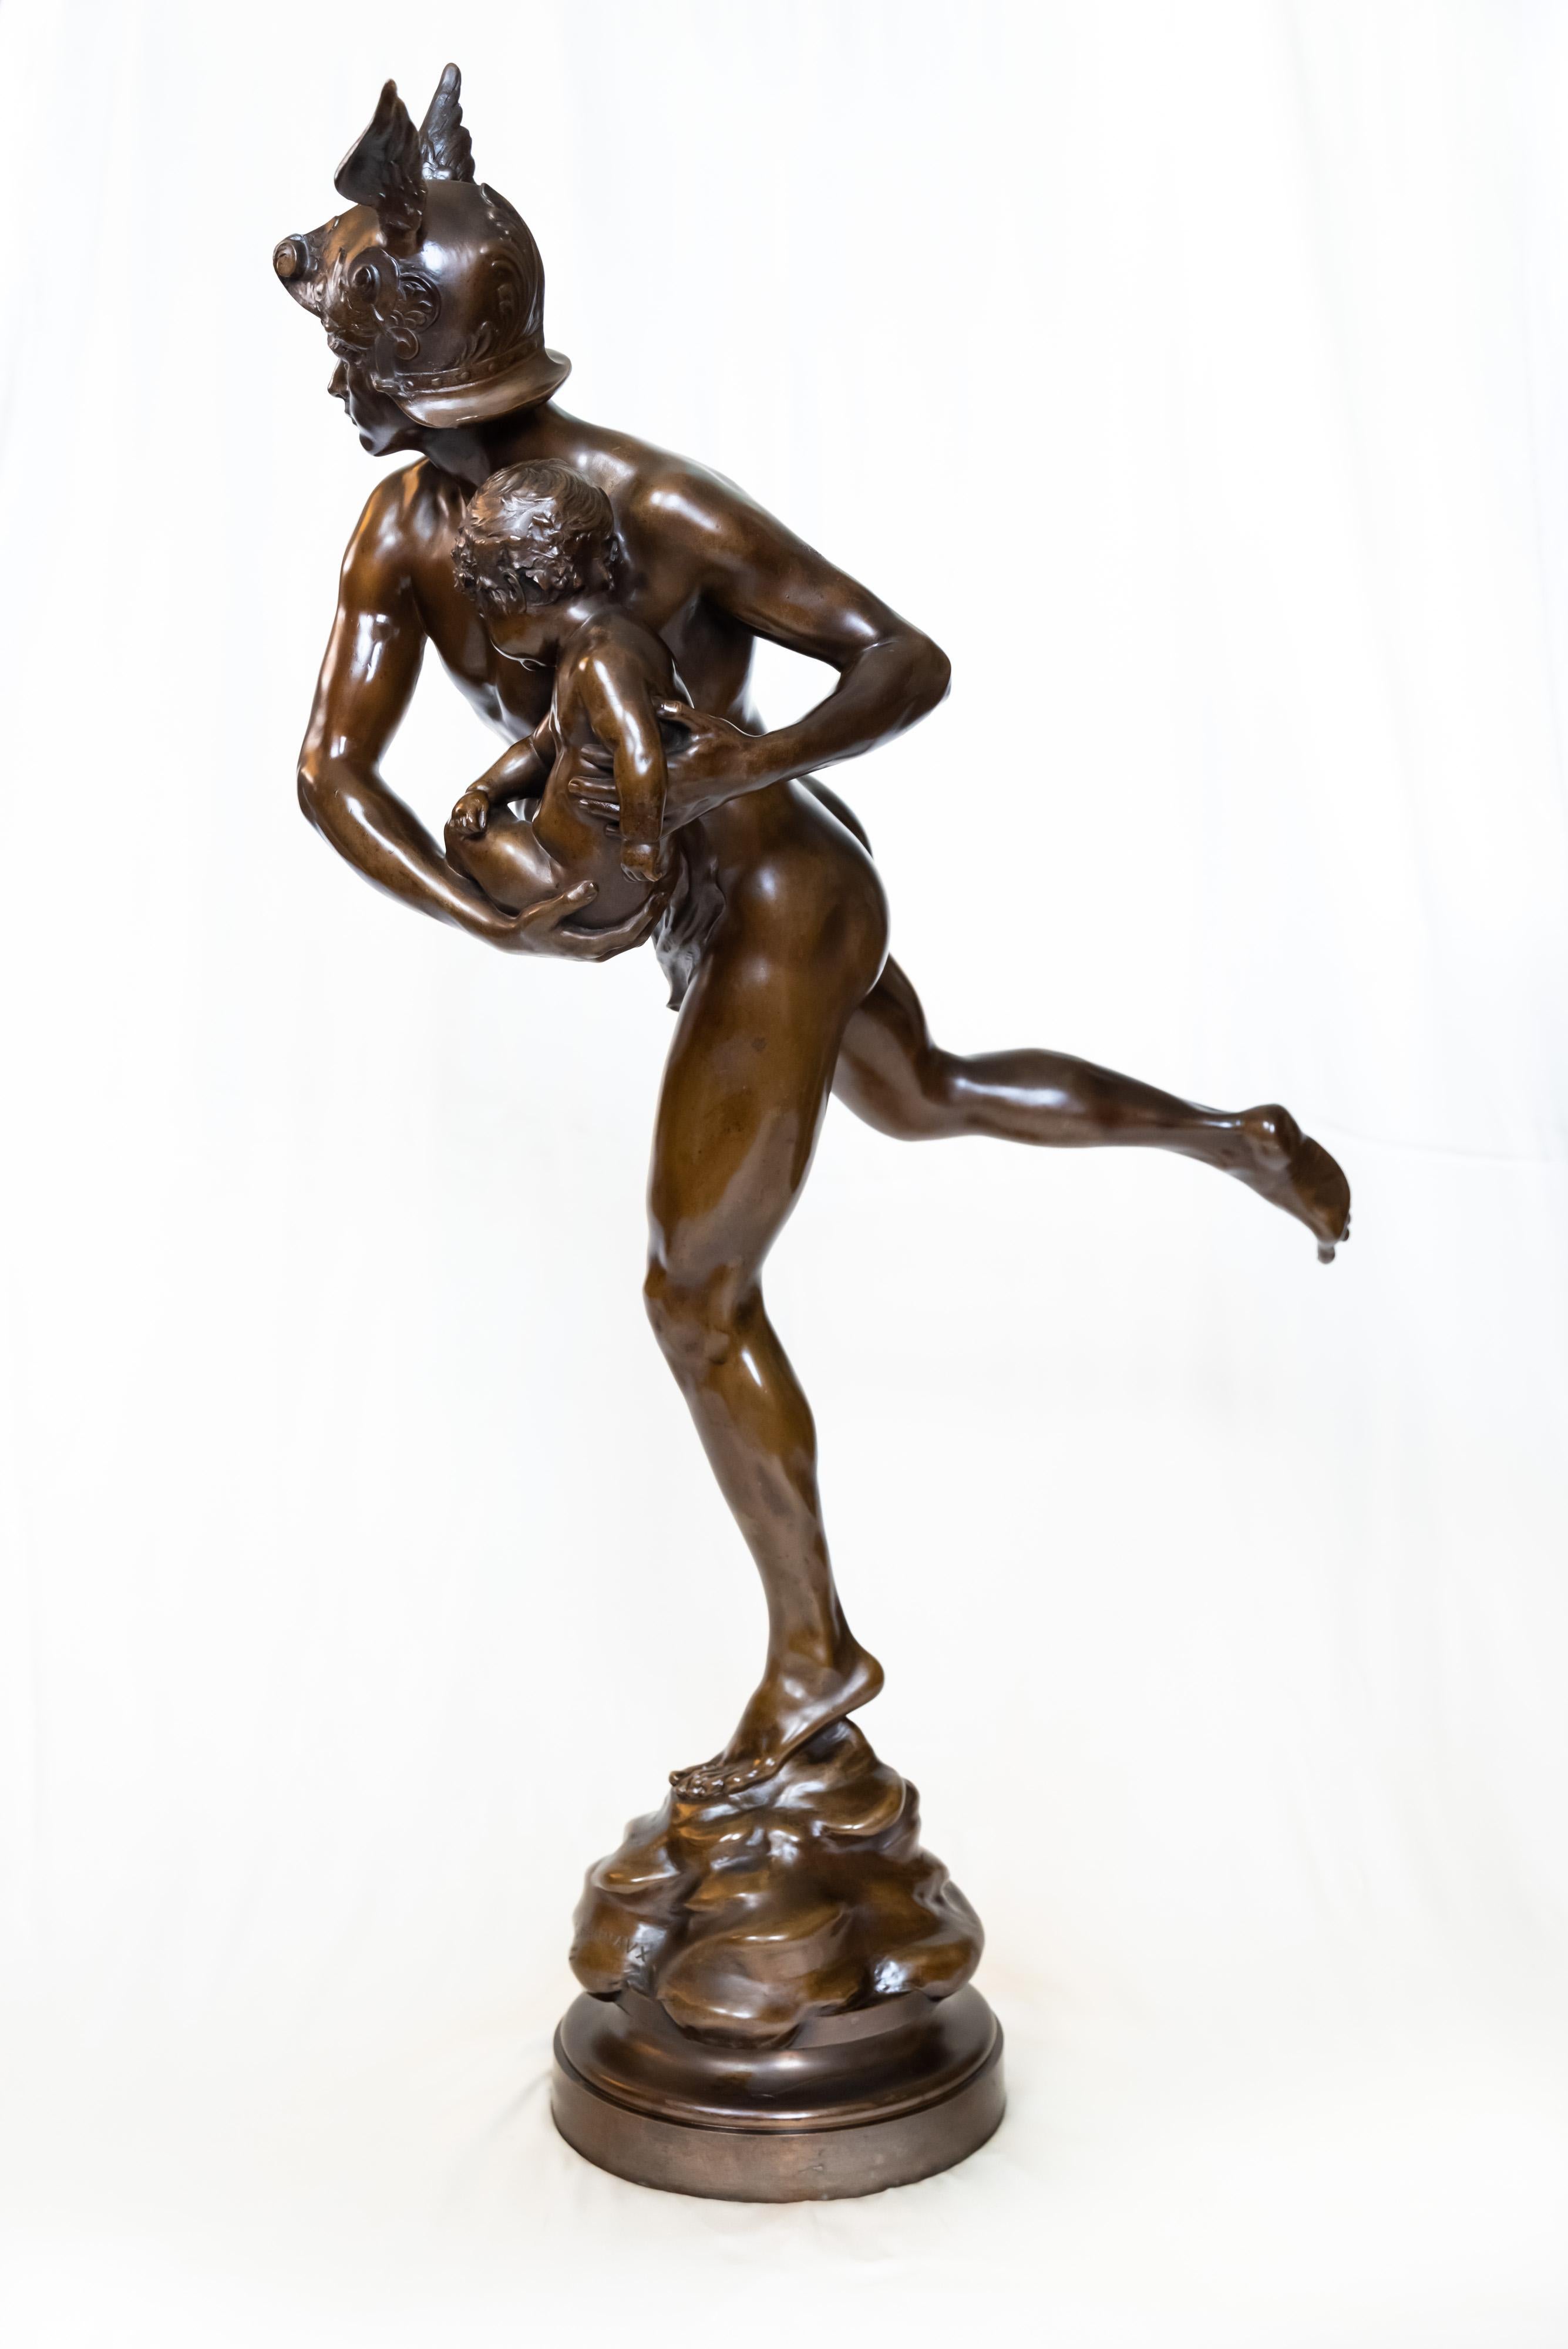 Mercure portant Cupidon - Mercury delivering Cupid - by the French sculptor Emmanuel Hannaux. In chocolate-patinated bronze and resting on a circular pivoting base, the piece exudes both supple elegance and fiery kinetic energy in its depiction of